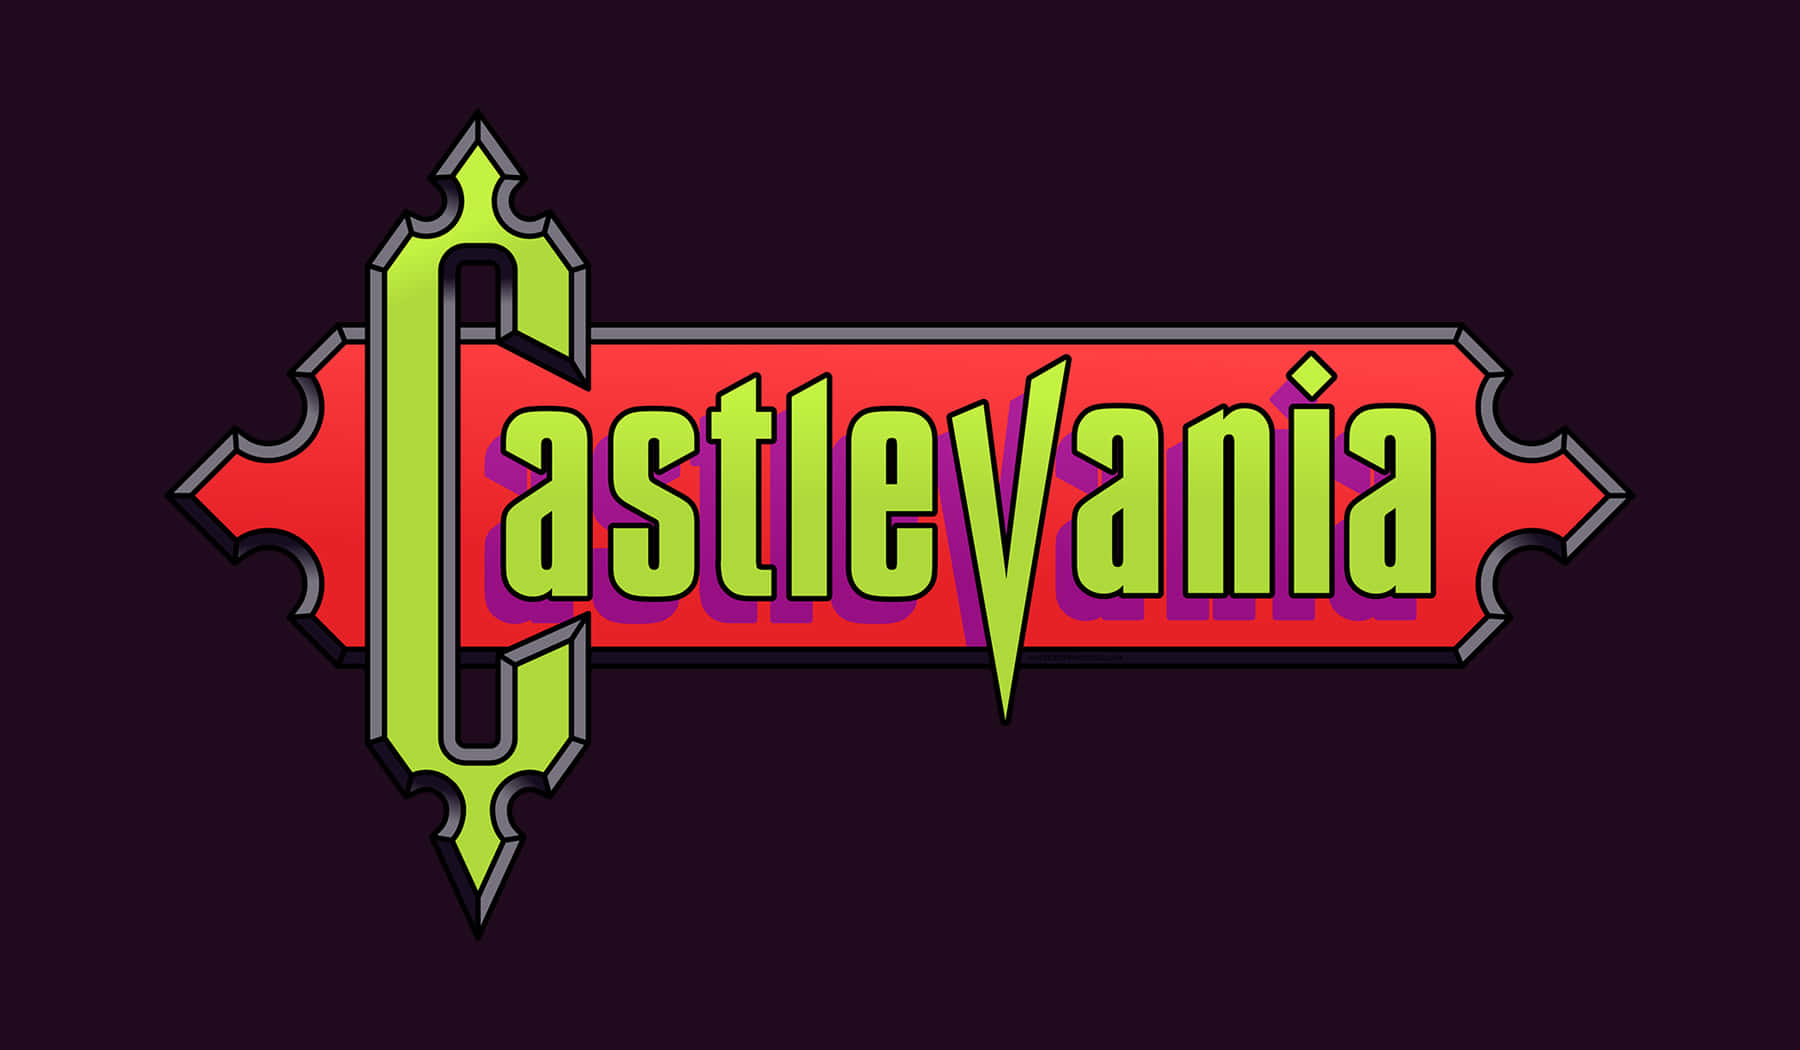 Experience An Epic Adventure In Castlevania